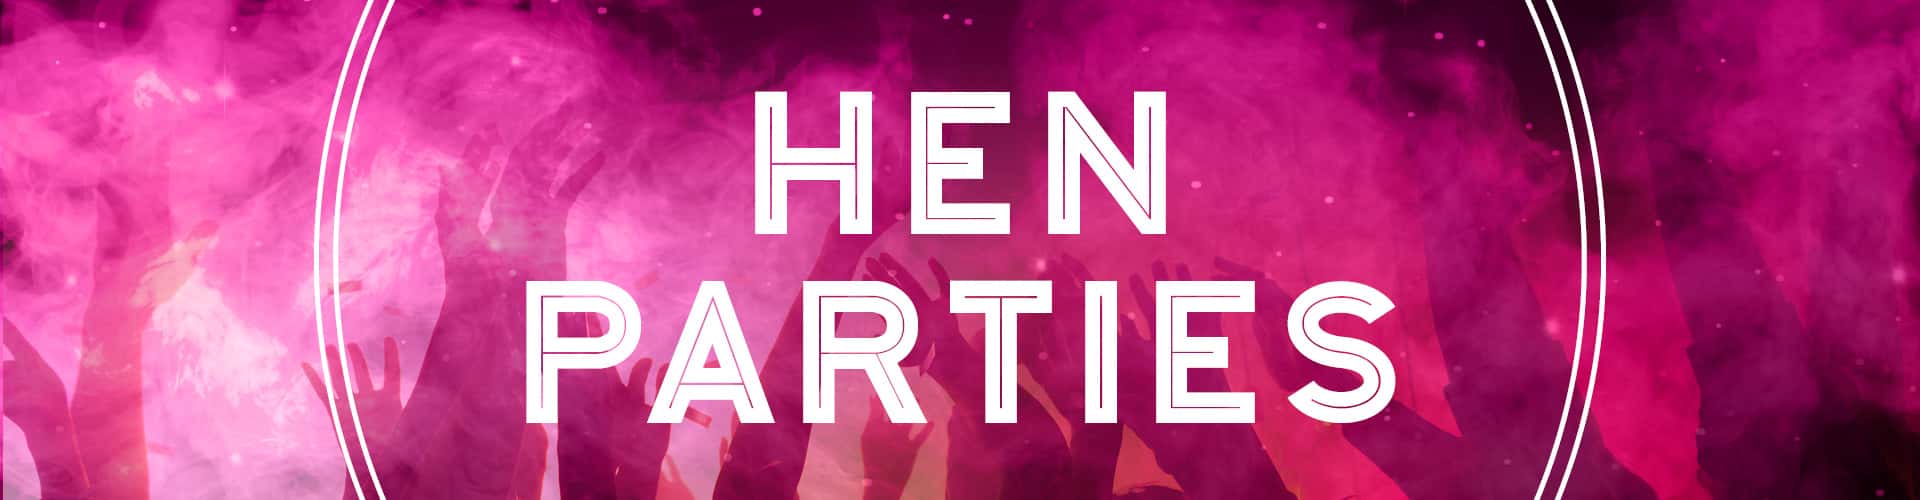 Hen Parties at Fever Derby